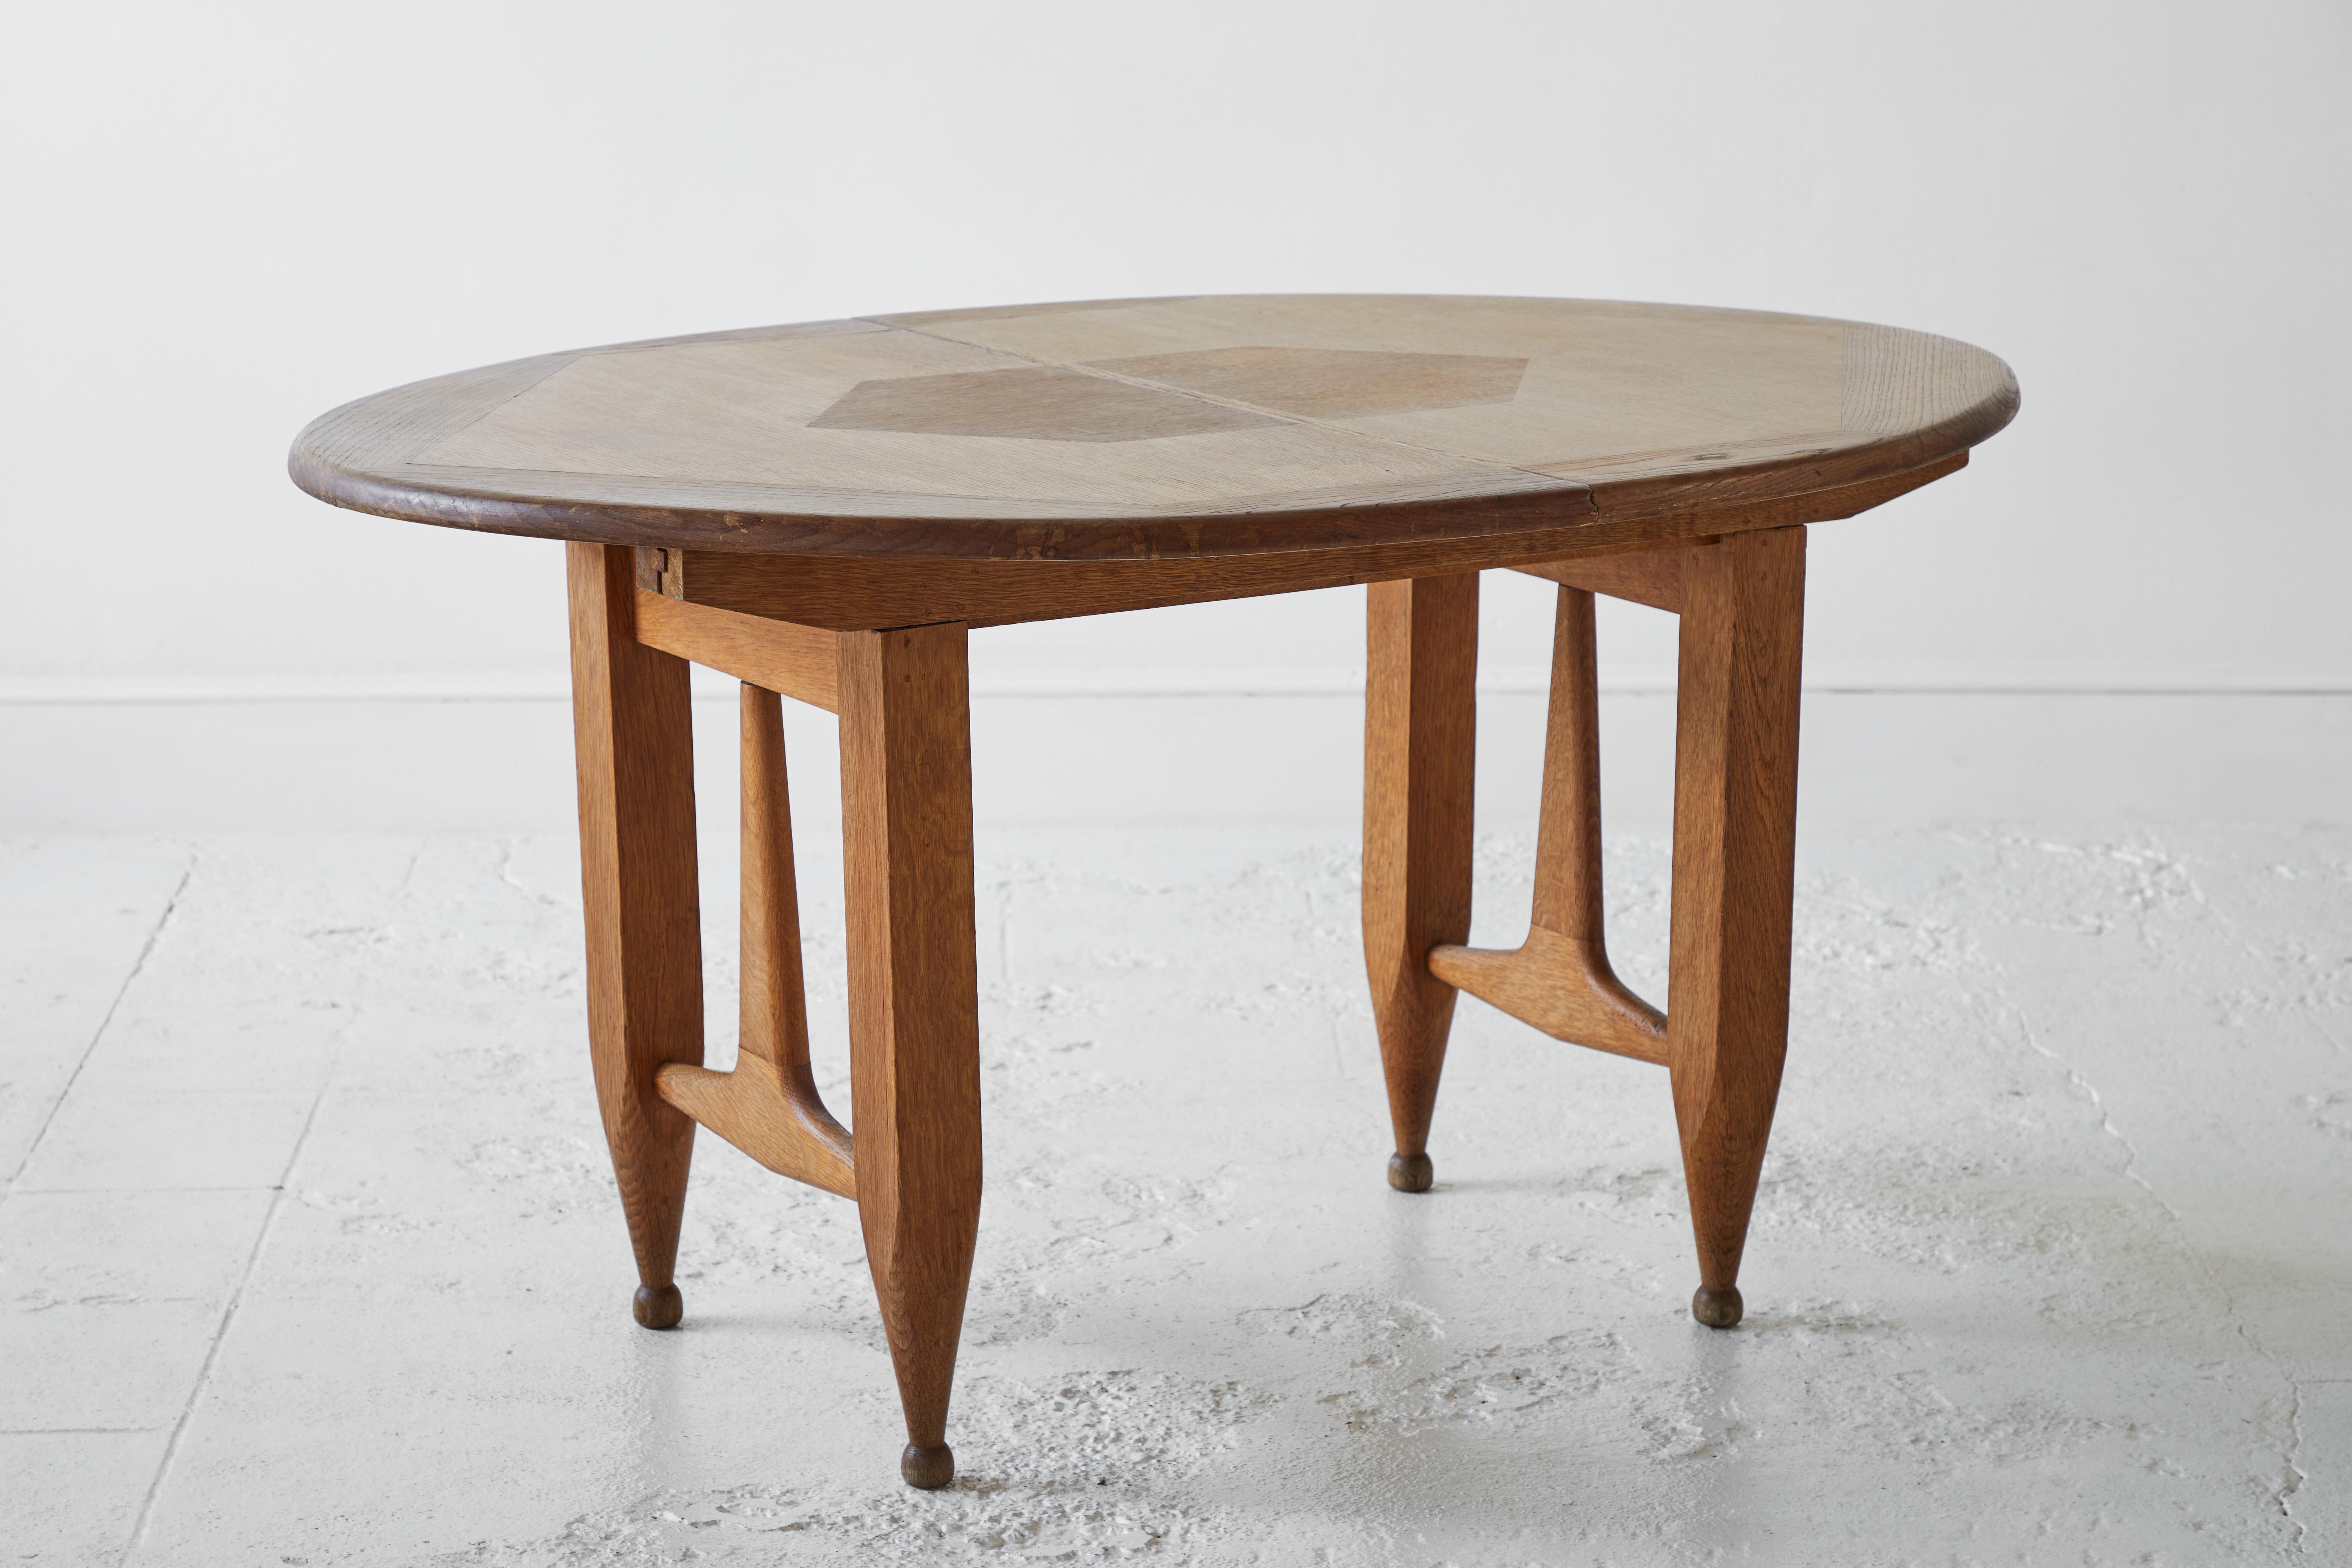 Guillerme et Chambron, extendable dining table, oak, 1960s.

Oval shaped dining table with inlayed top. This extendable table in solid oak comes with two optional leaves, which makes it a very versatile item. The sculptural two legged base has the